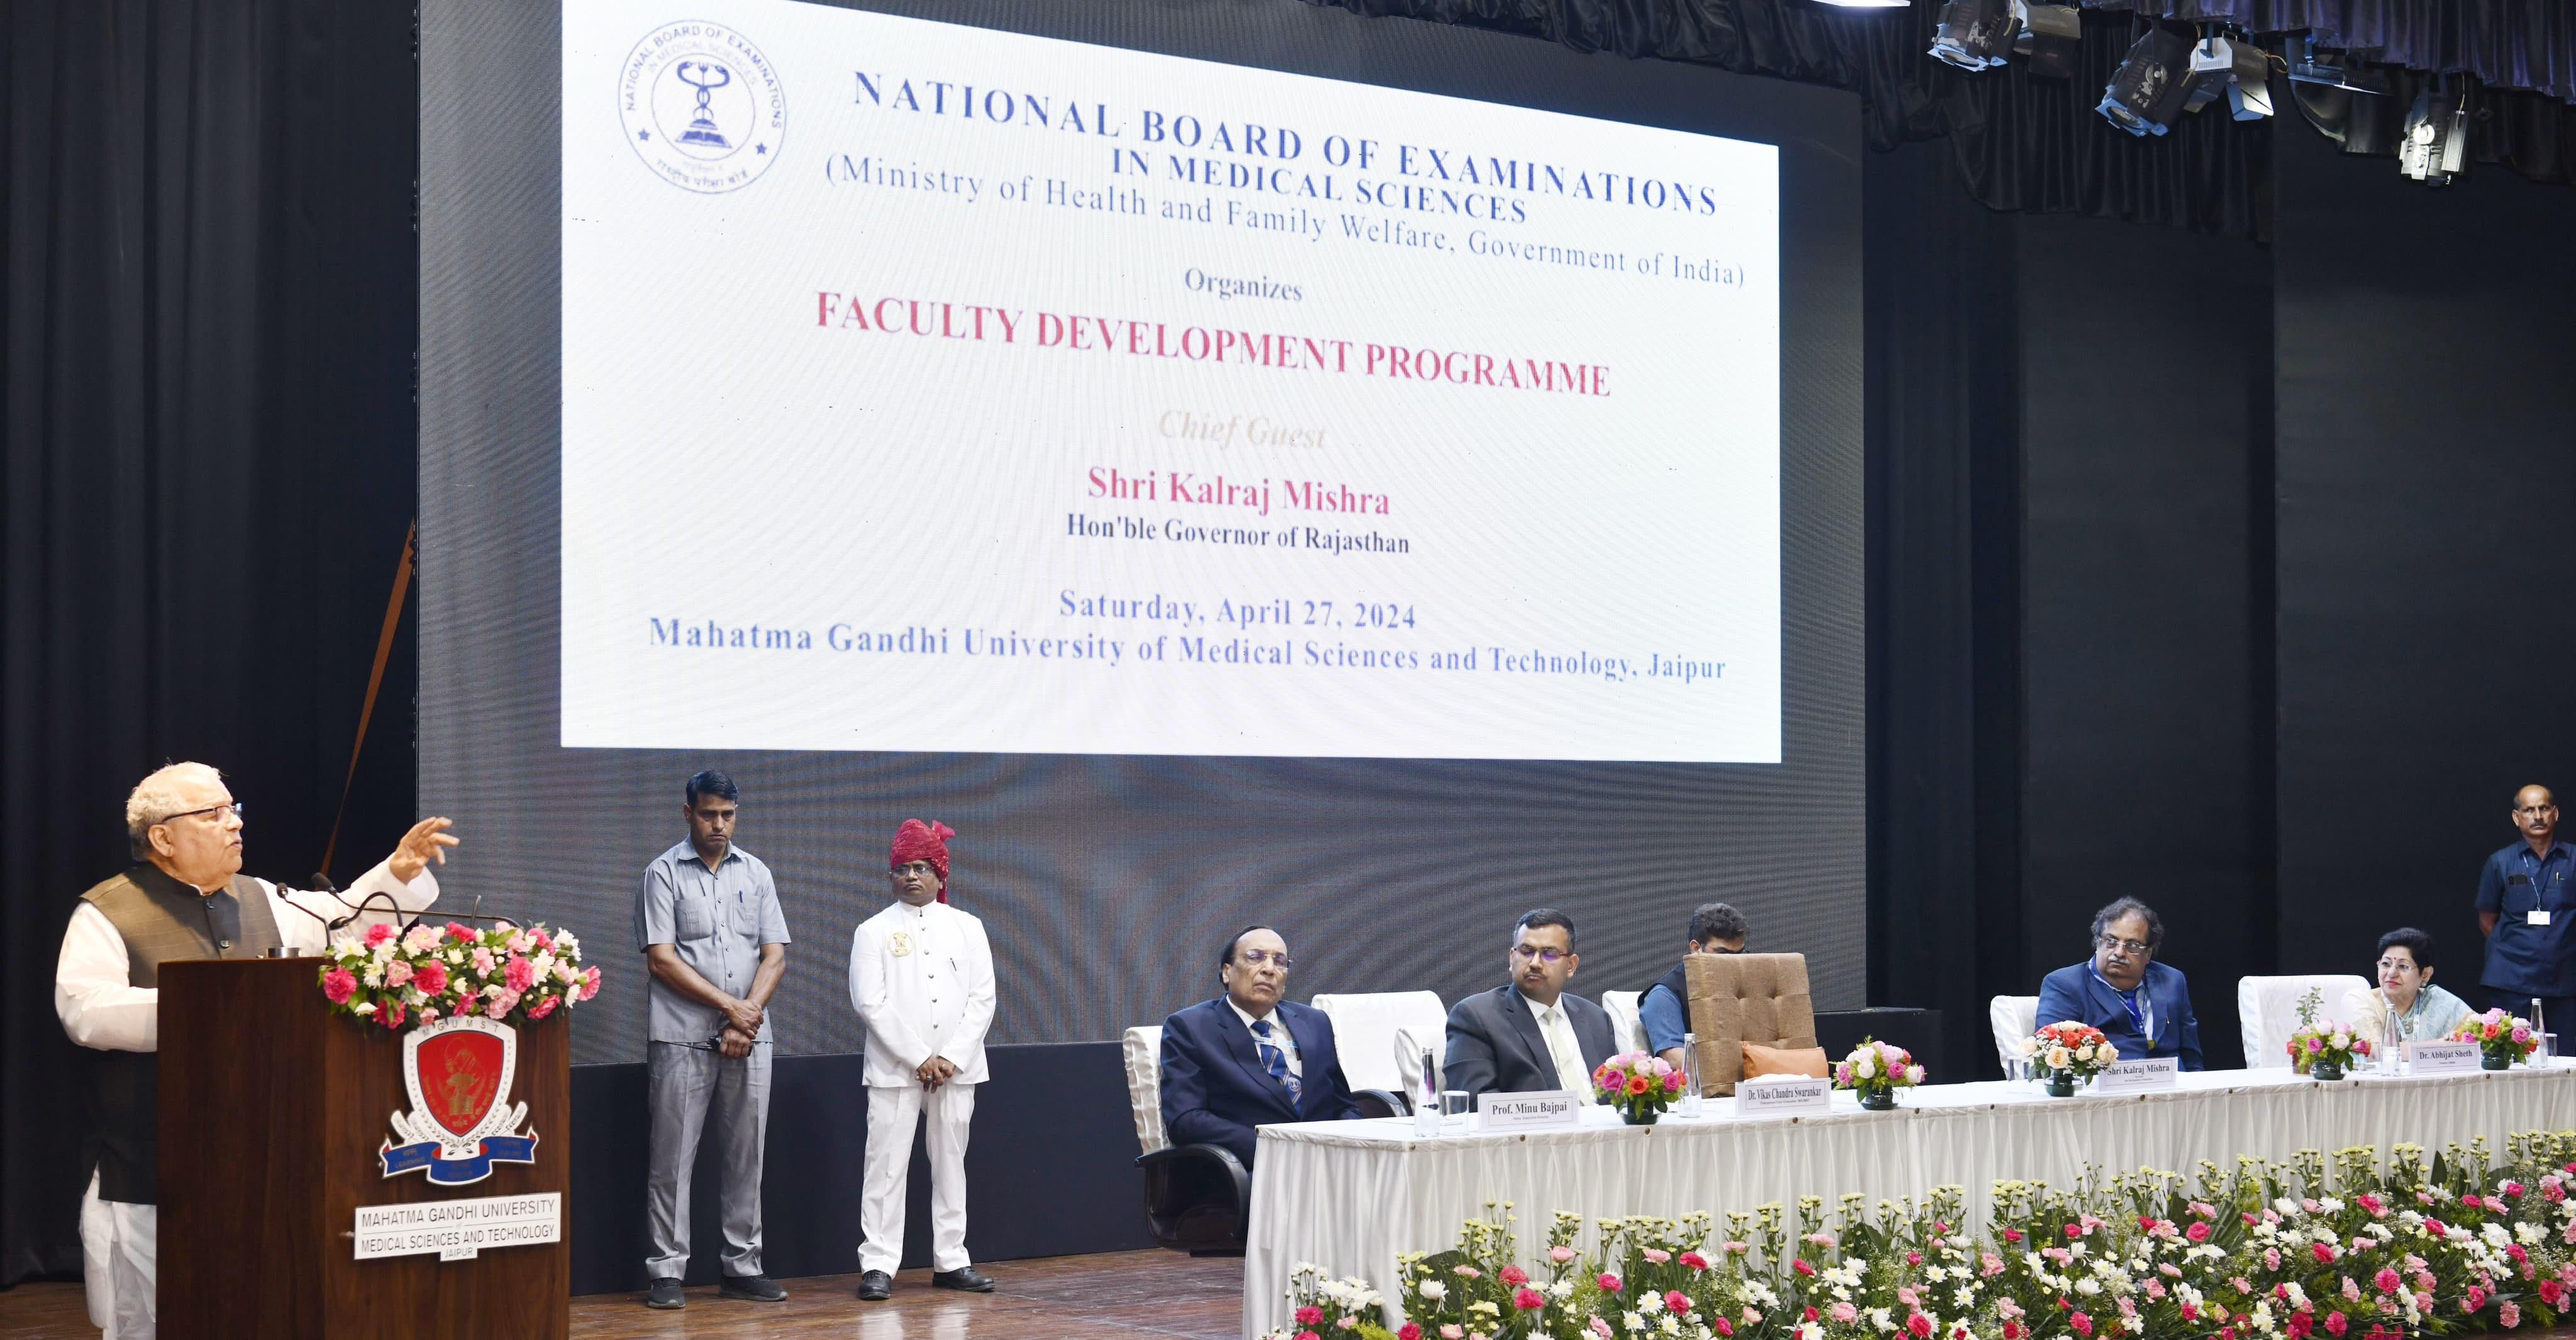 Hon'ble Governor addressing Faculty Development Programme organised by National Board of Examination in Medical Sciences 